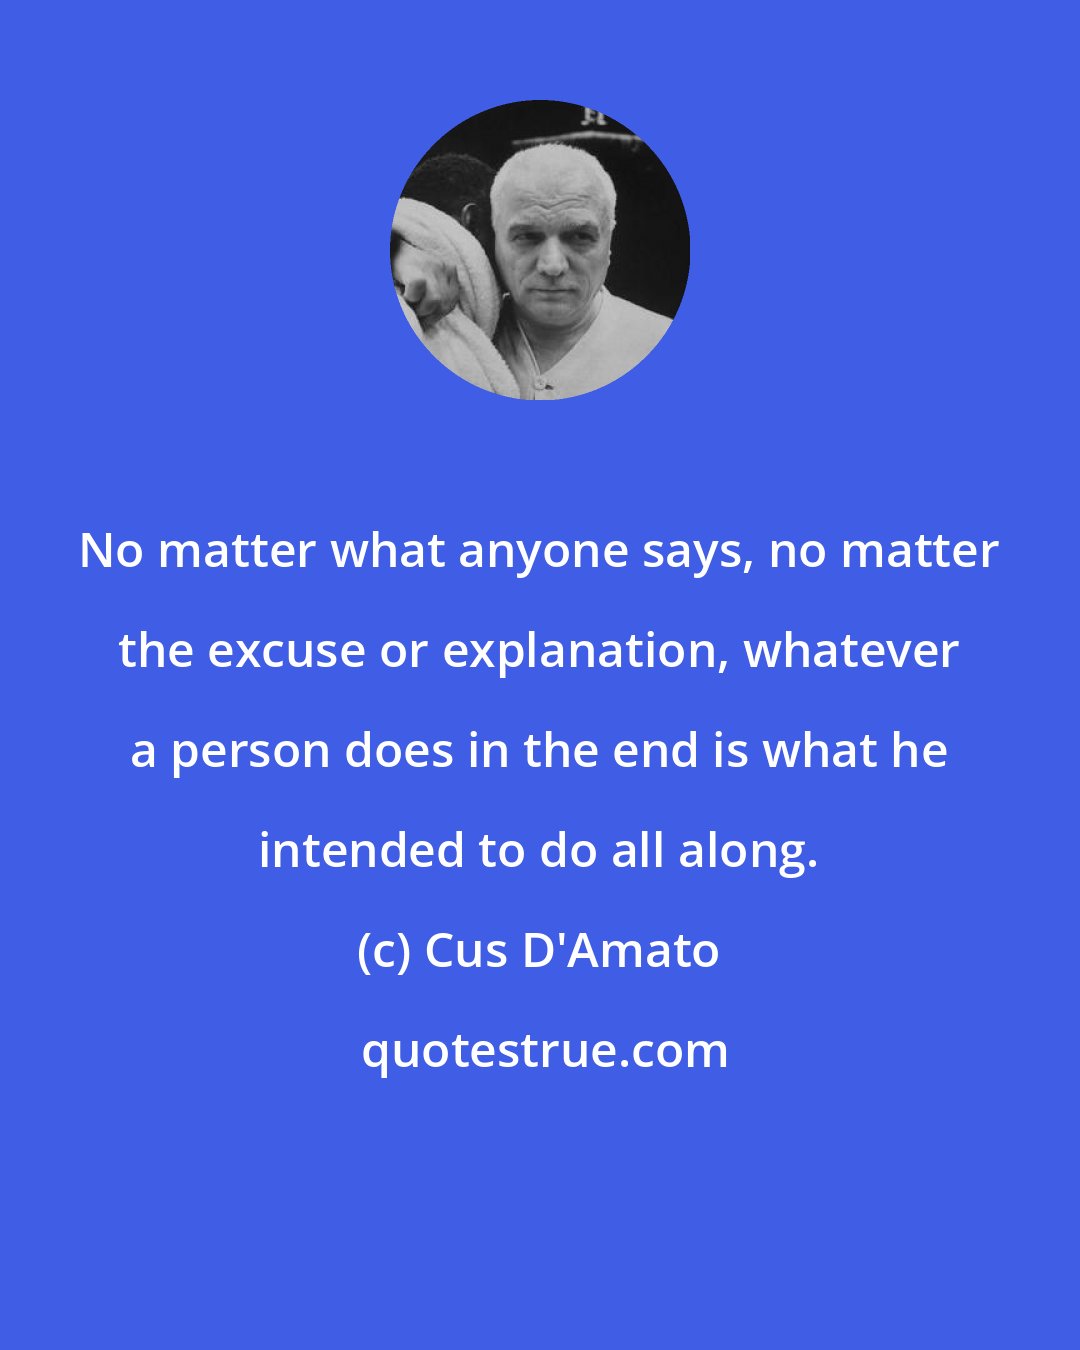 Cus D'Amato: No matter what anyone says, no matter the excuse or explanation, whatever a person does in the end is what he intended to do all along.